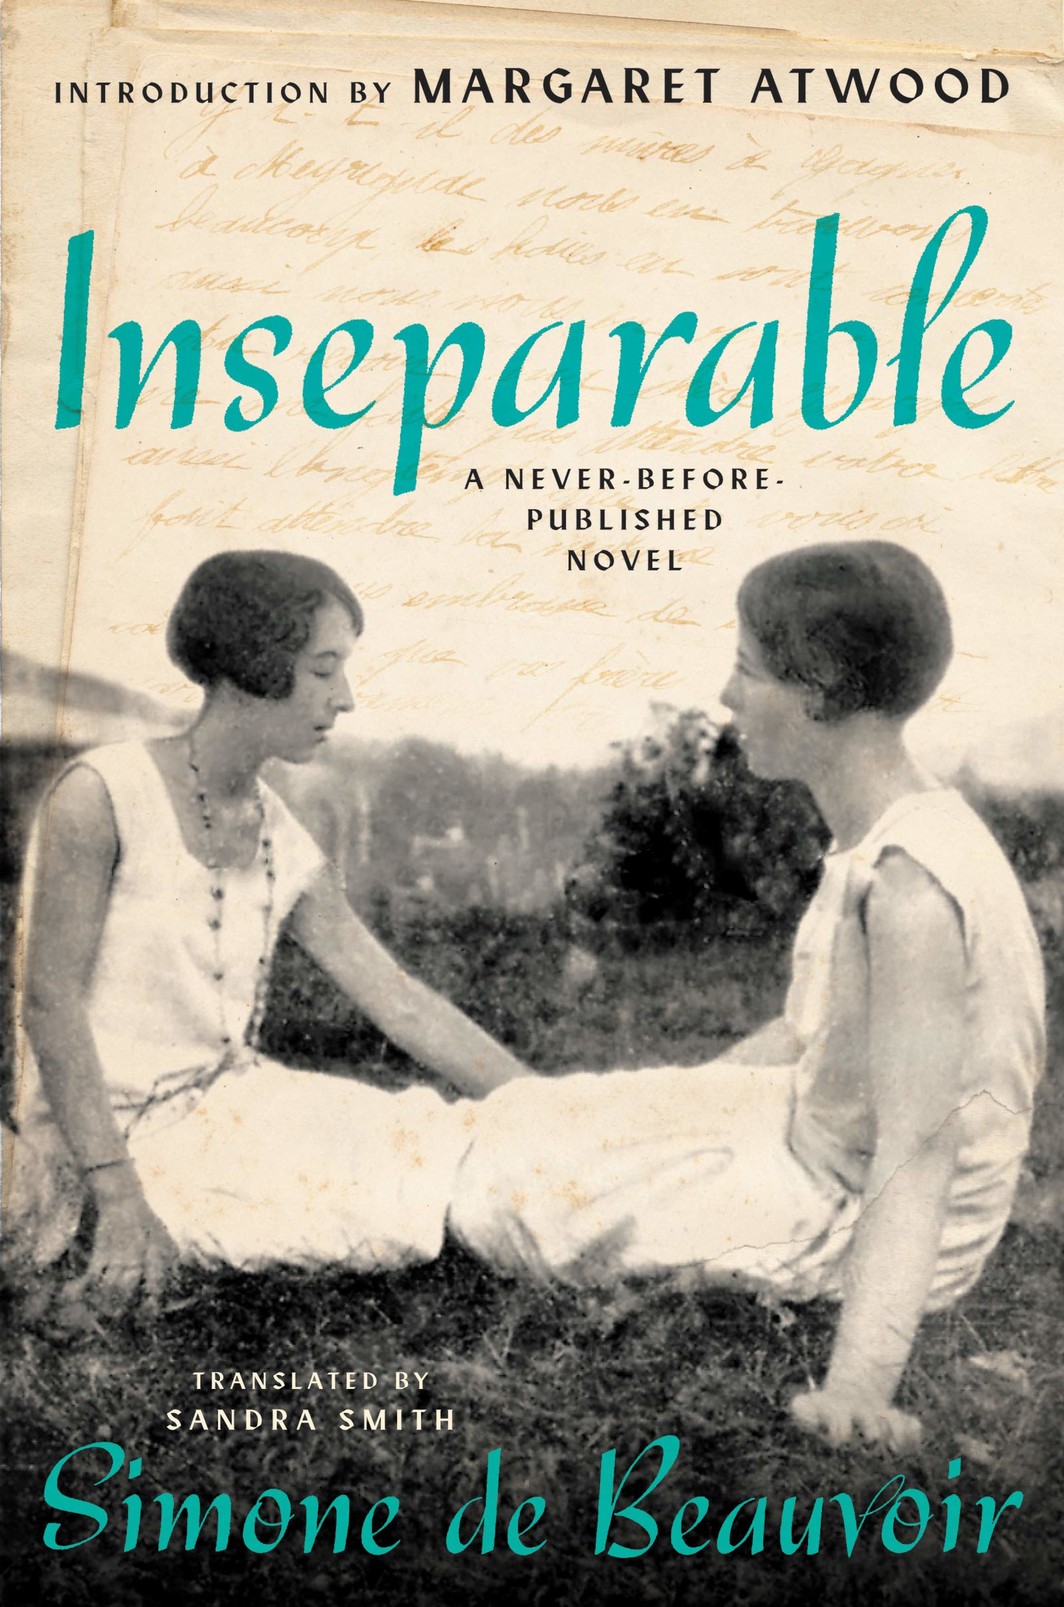 The cover of Inseparable: A Never-Before-Published Novel